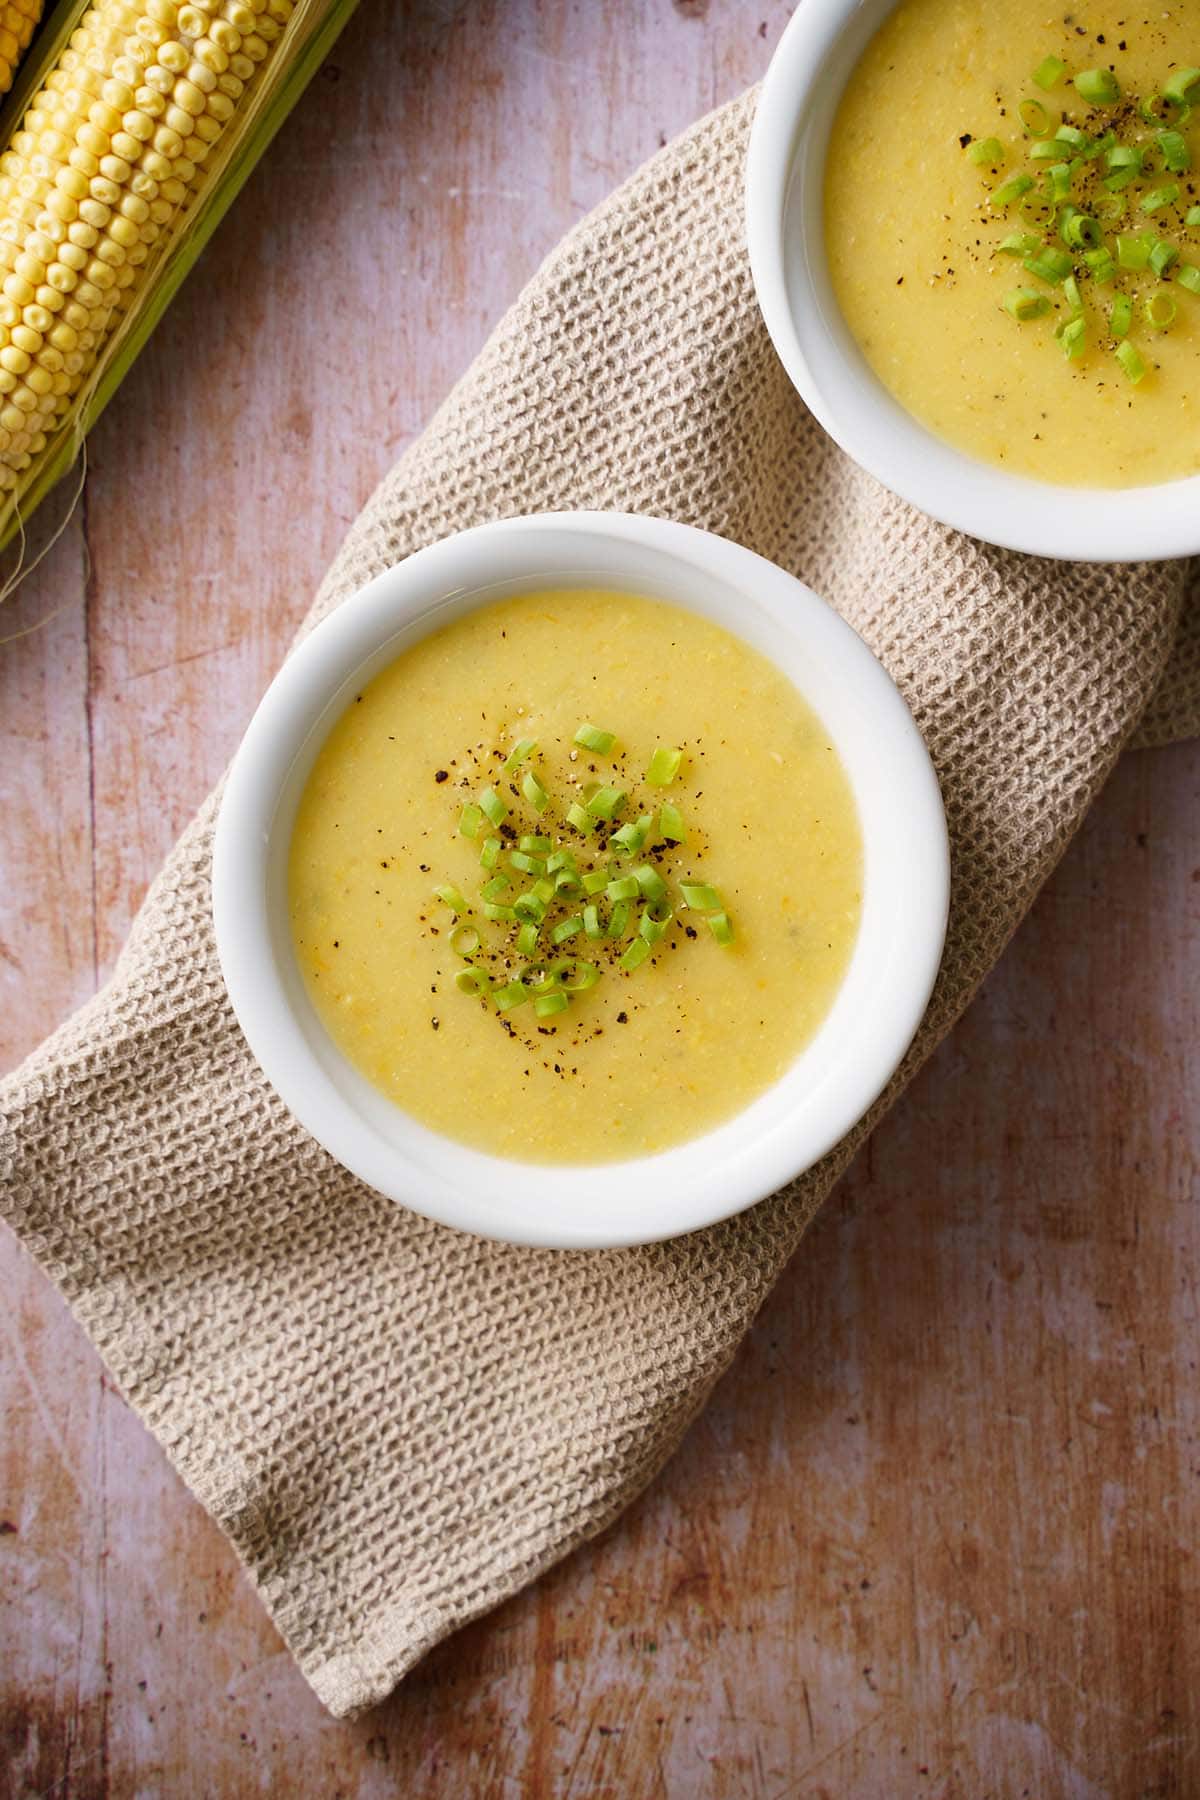 corn soup in white bowl garnished with spring onion greens